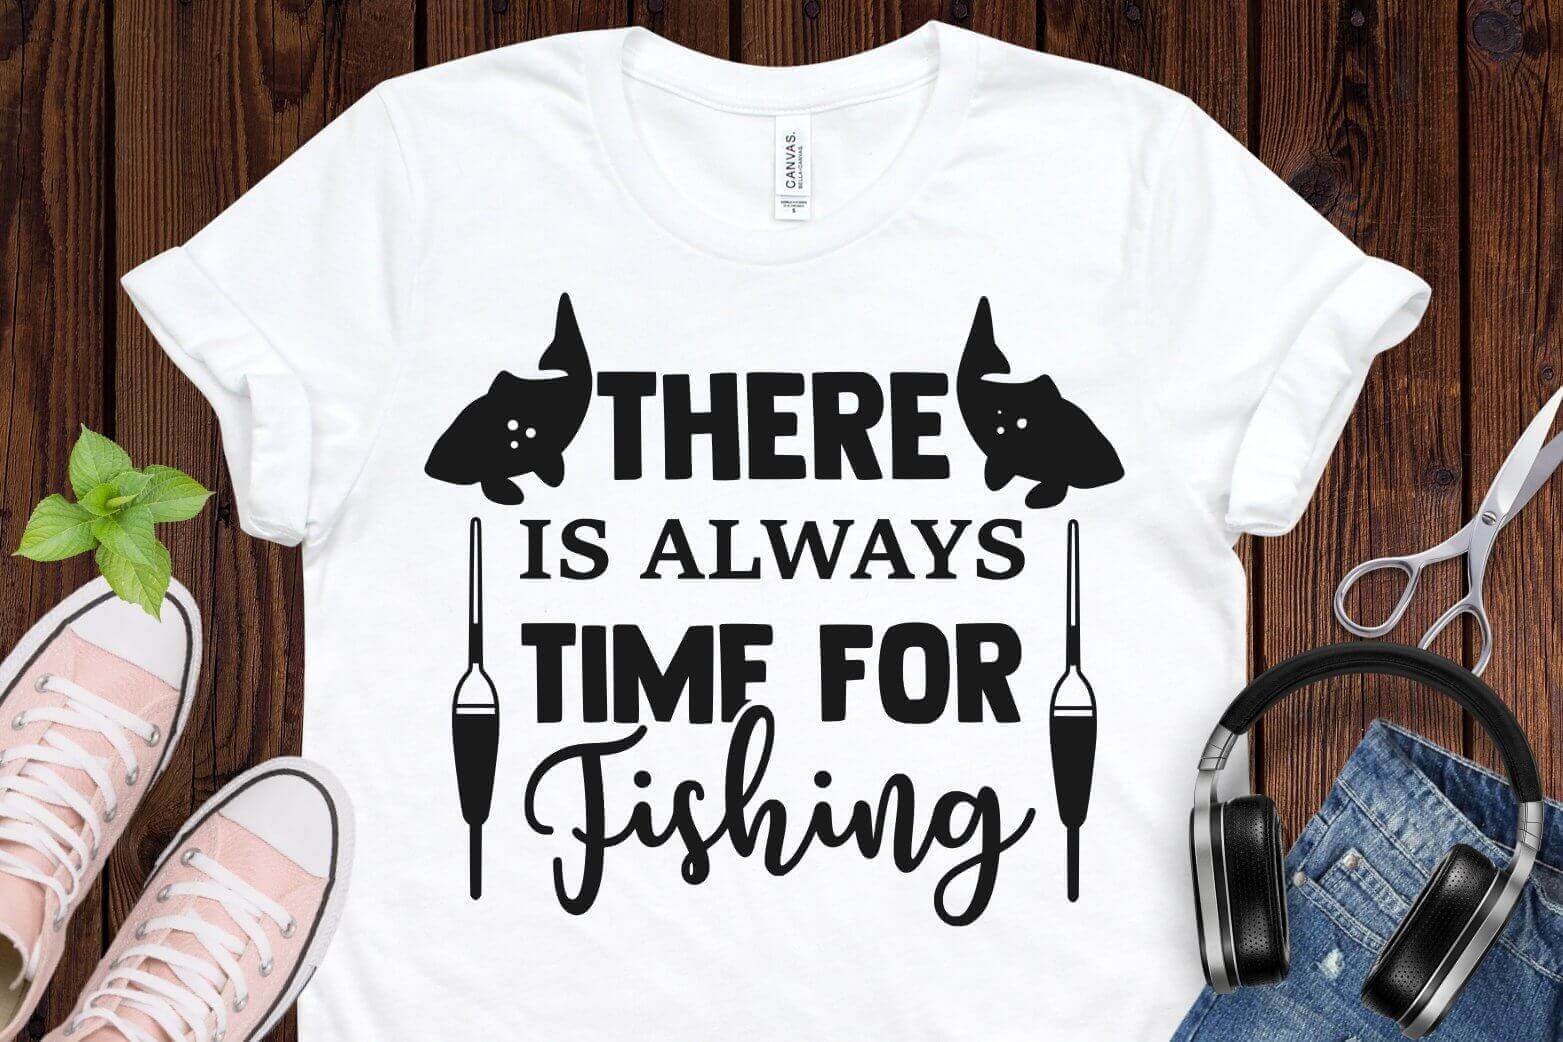 There is Always Time for Fishing.